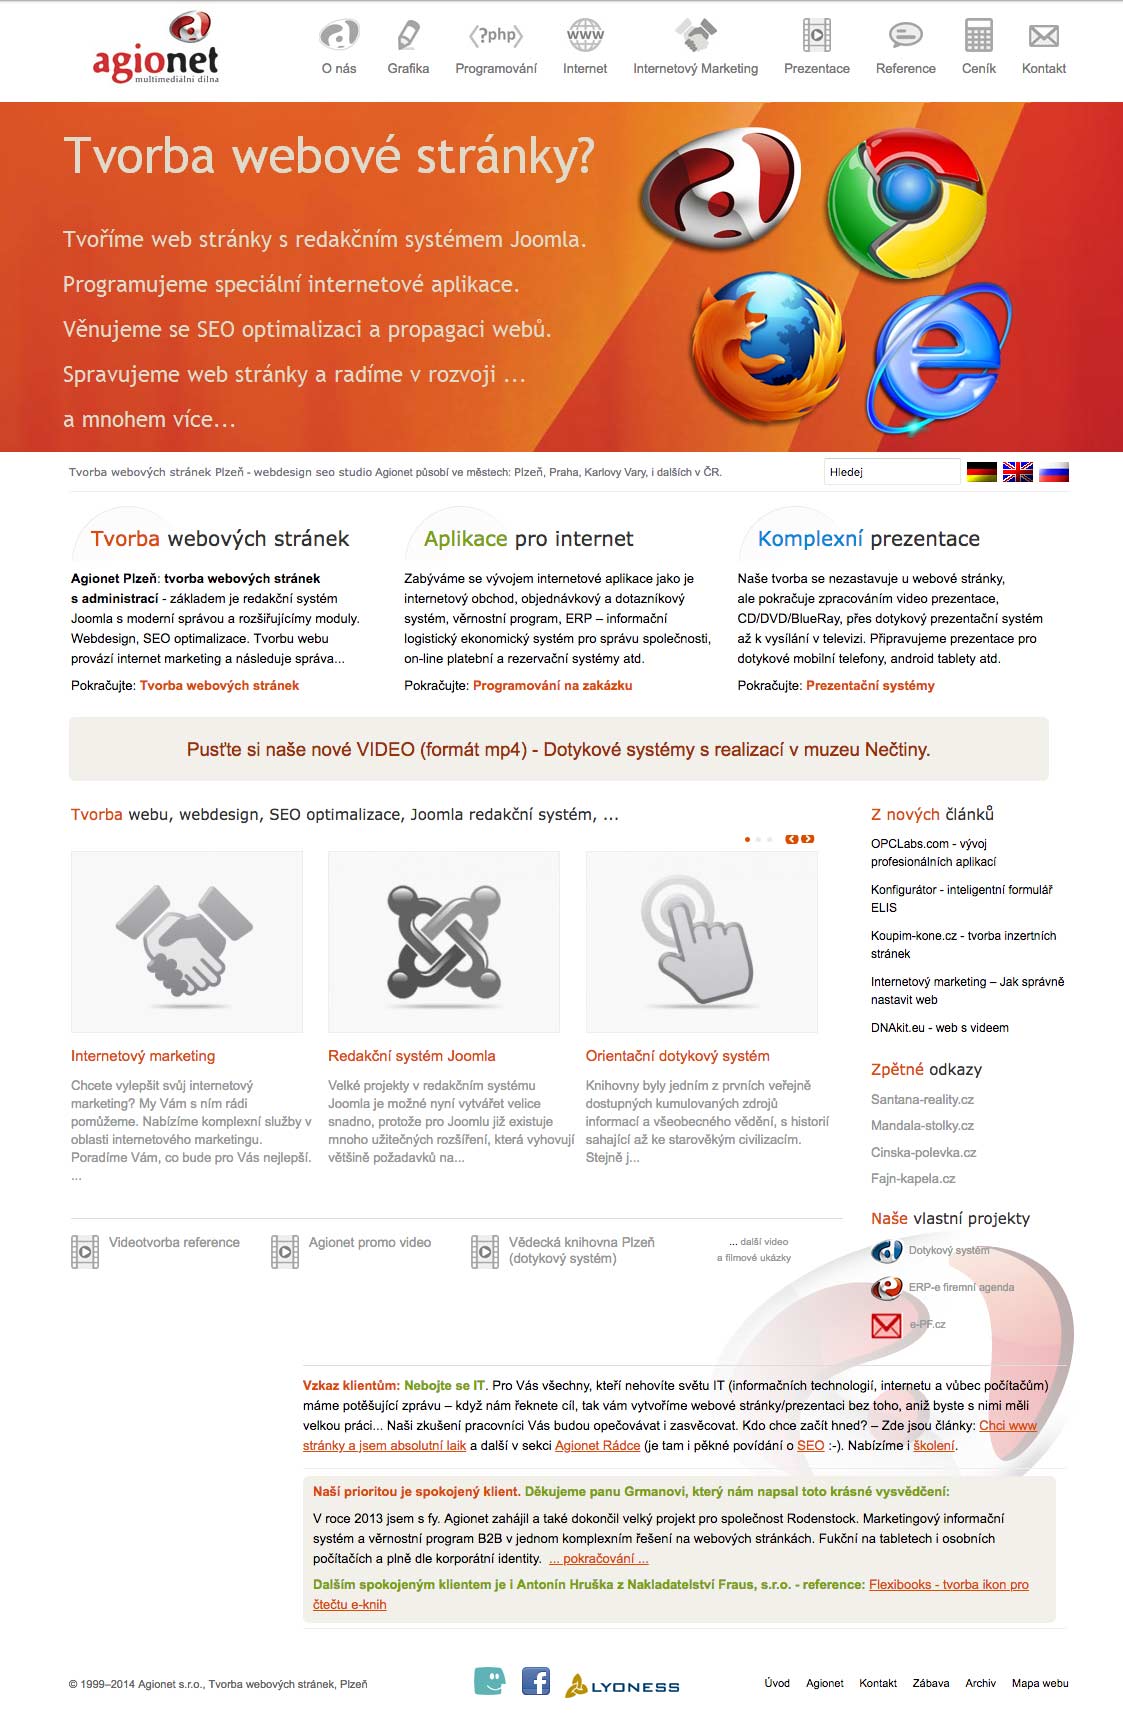 agionet web historie 2010 2015